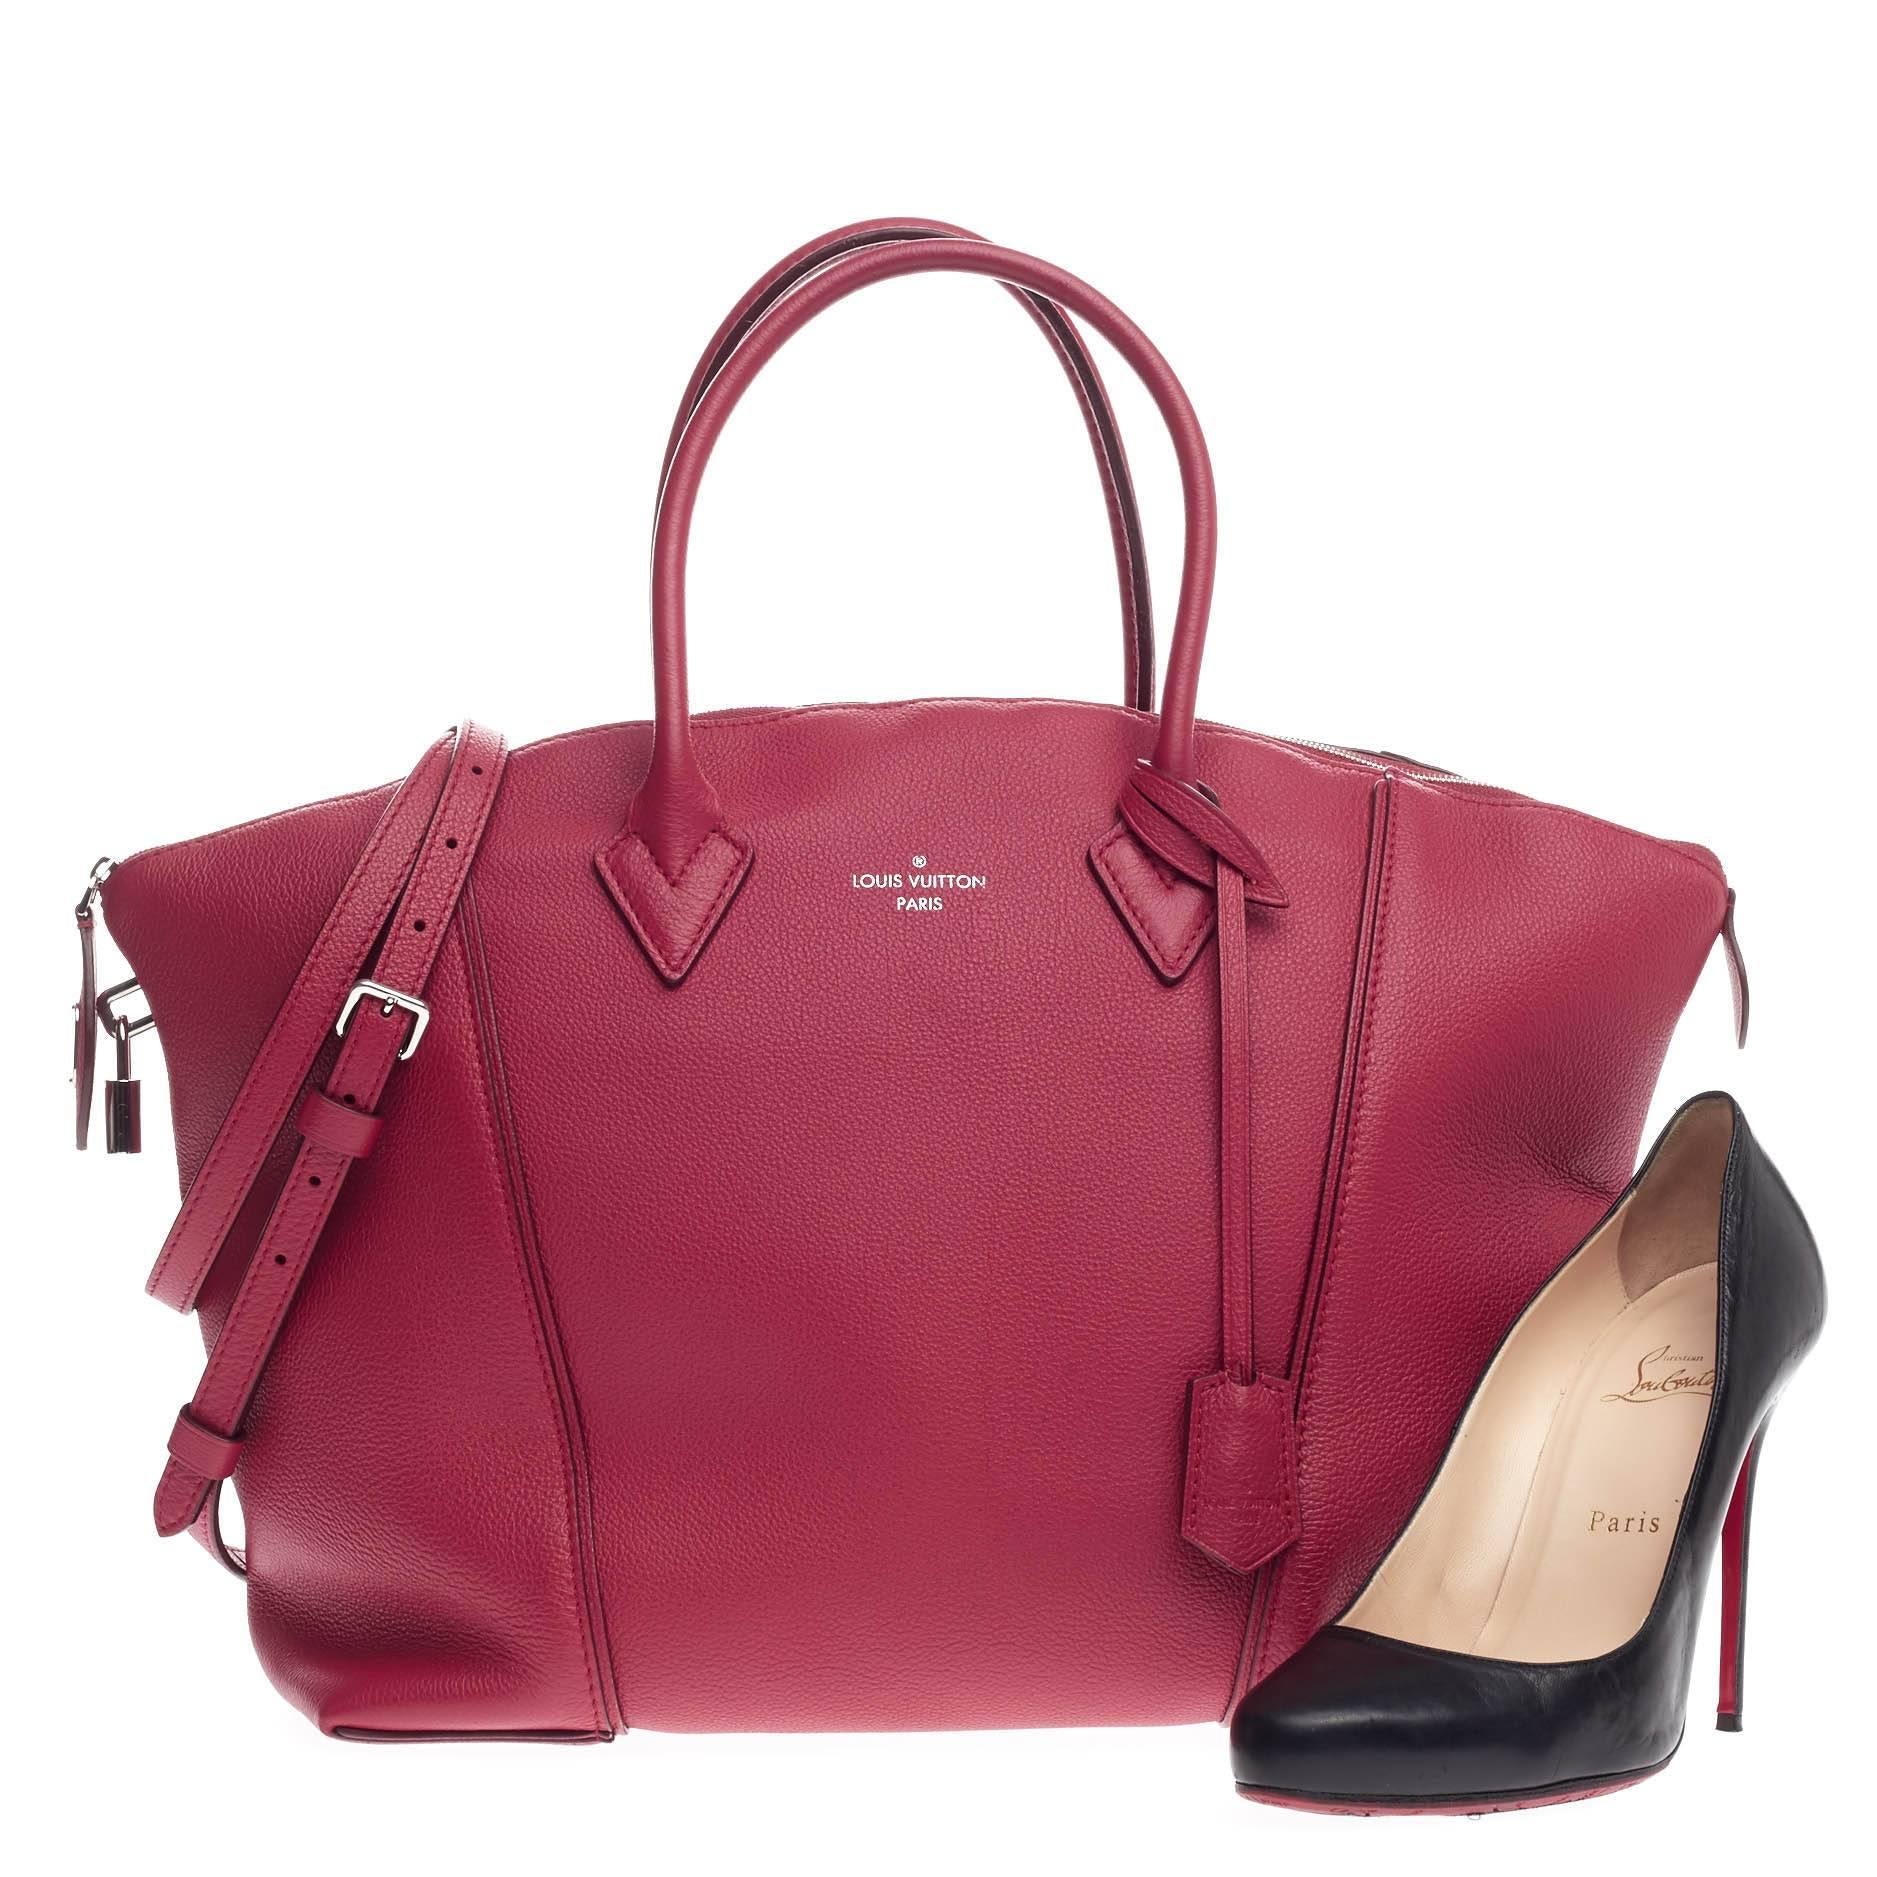 This authentic Louis Vuitton Soft Lockit Leather MM first introduced in 1958, is re-imagined with modern and understated, clean lines showcasing the brand's ever-evolving style. Crafted from raspberry leather, this chic tote features dual-rolled